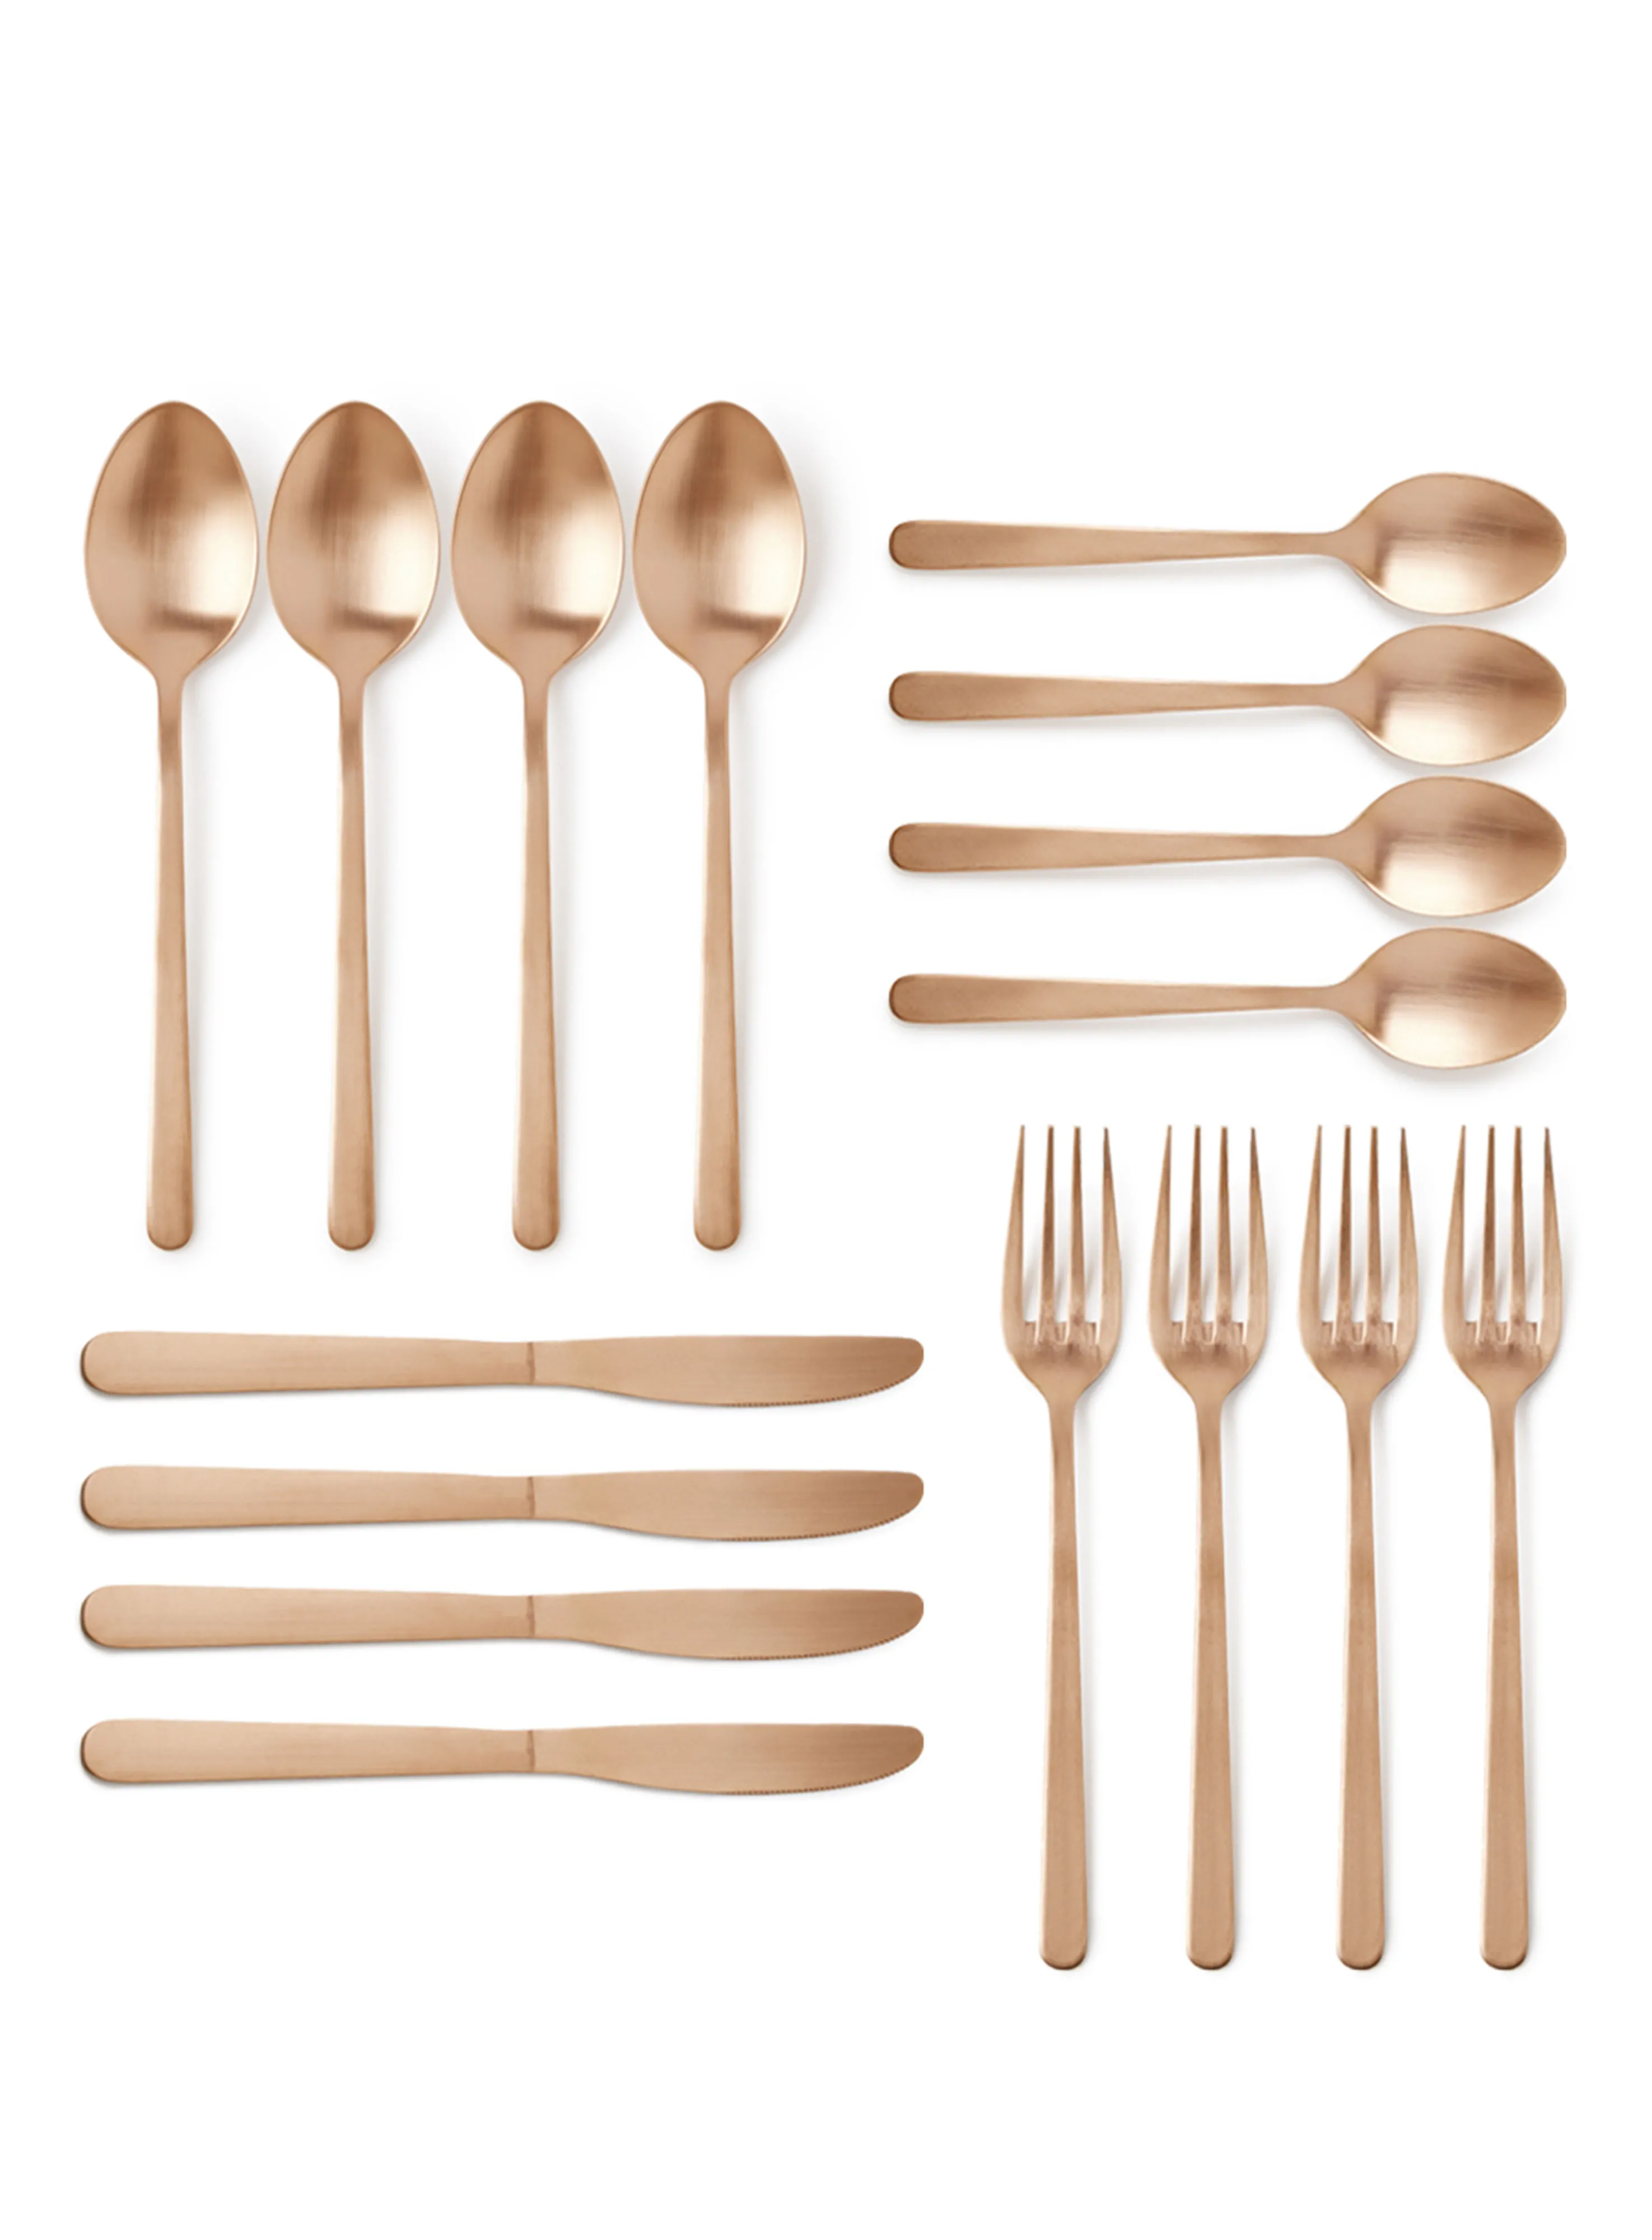 noon east 16 Piece Cutlery Set - Made Of Stainless Steel - Silverware Flatware - Spoons And Forks Set, Spoon Set - Table Spoons, Tea Spoons, Forks, Knives - Serves 4 - Design Copper Sail